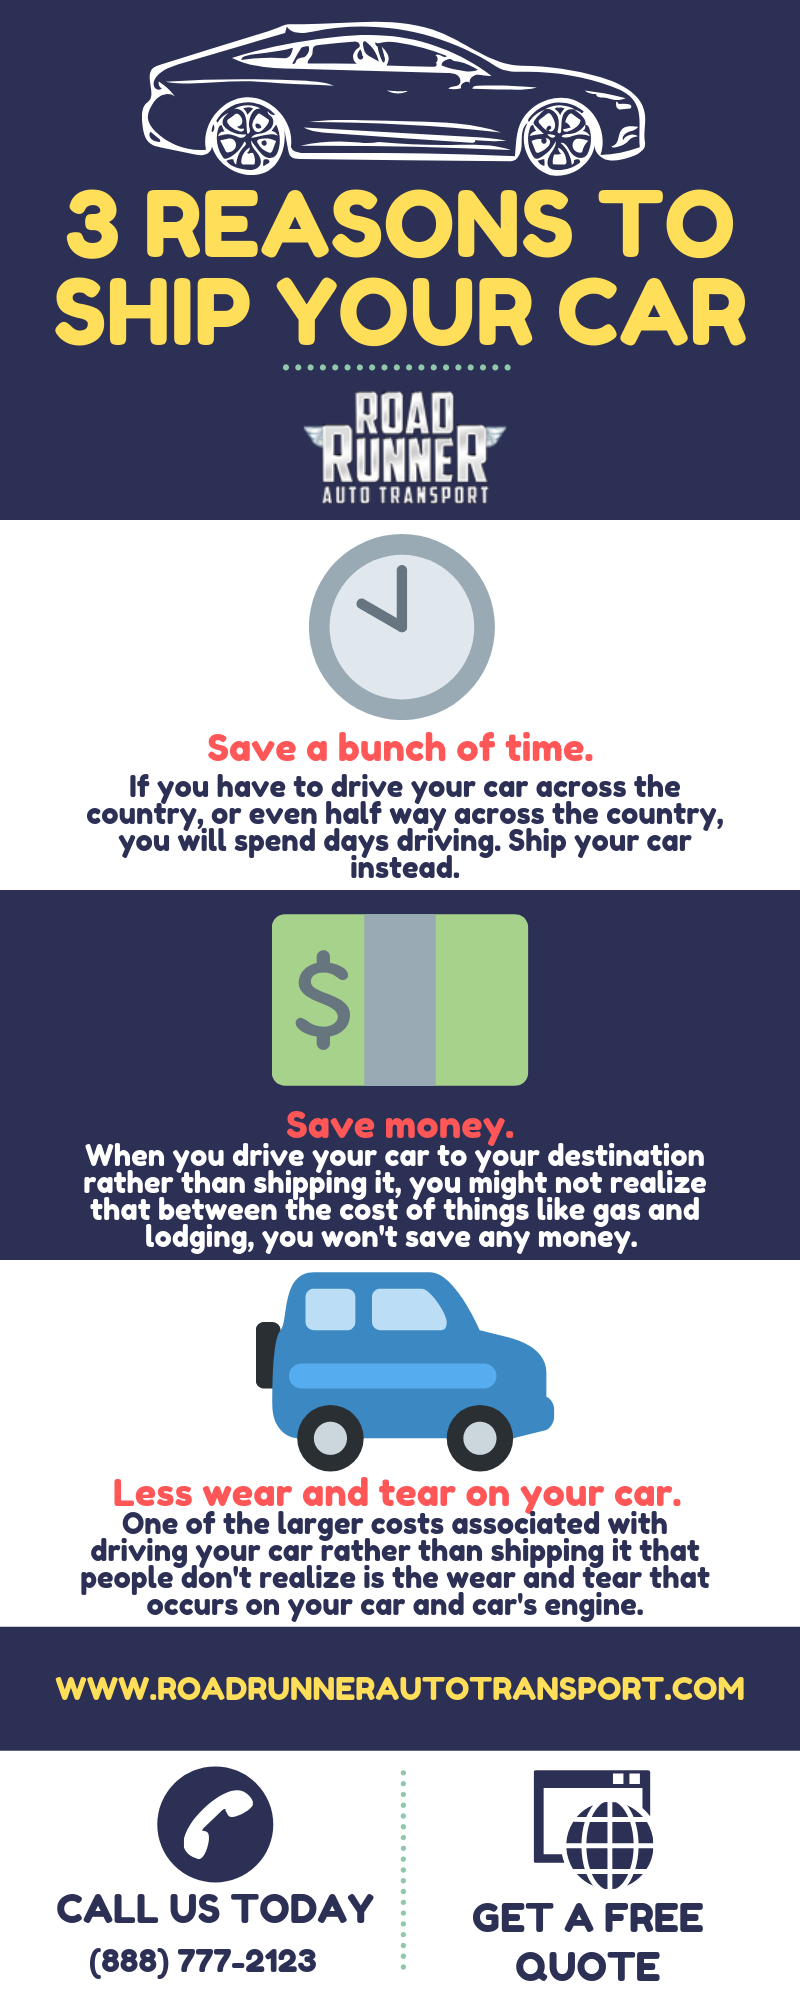 3 reasons to ship your car